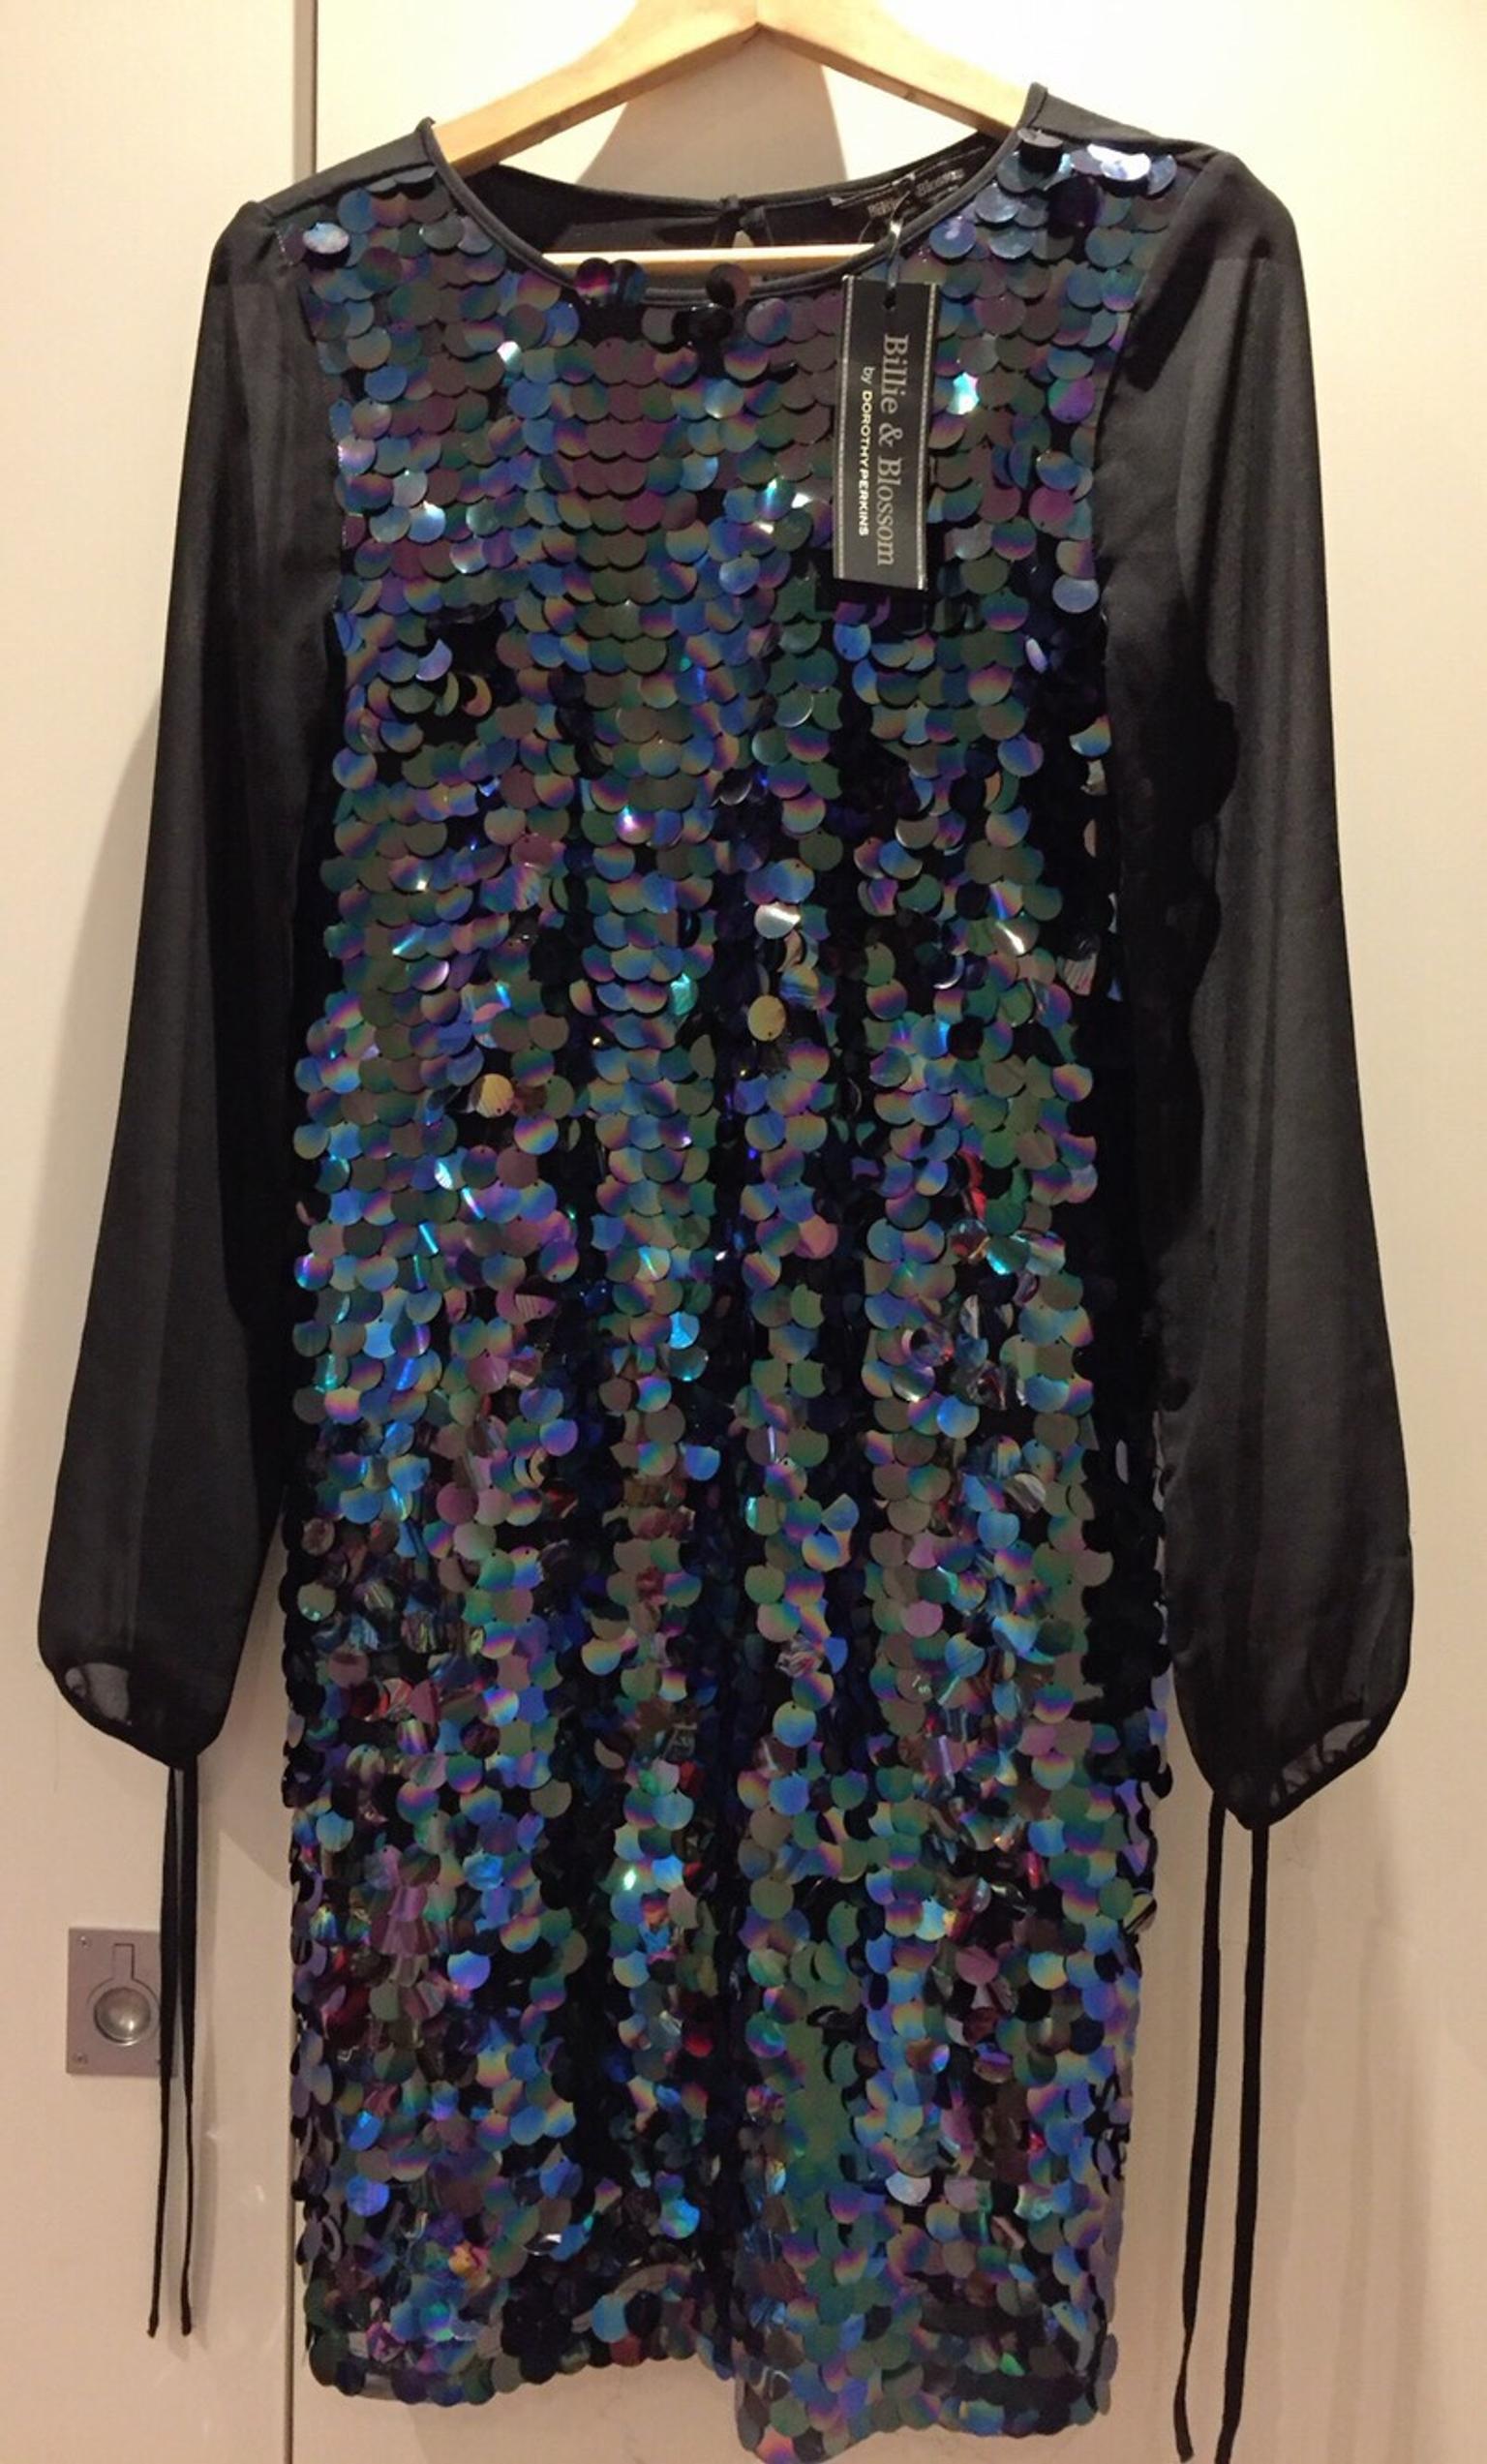 billie and blossom sequin dress